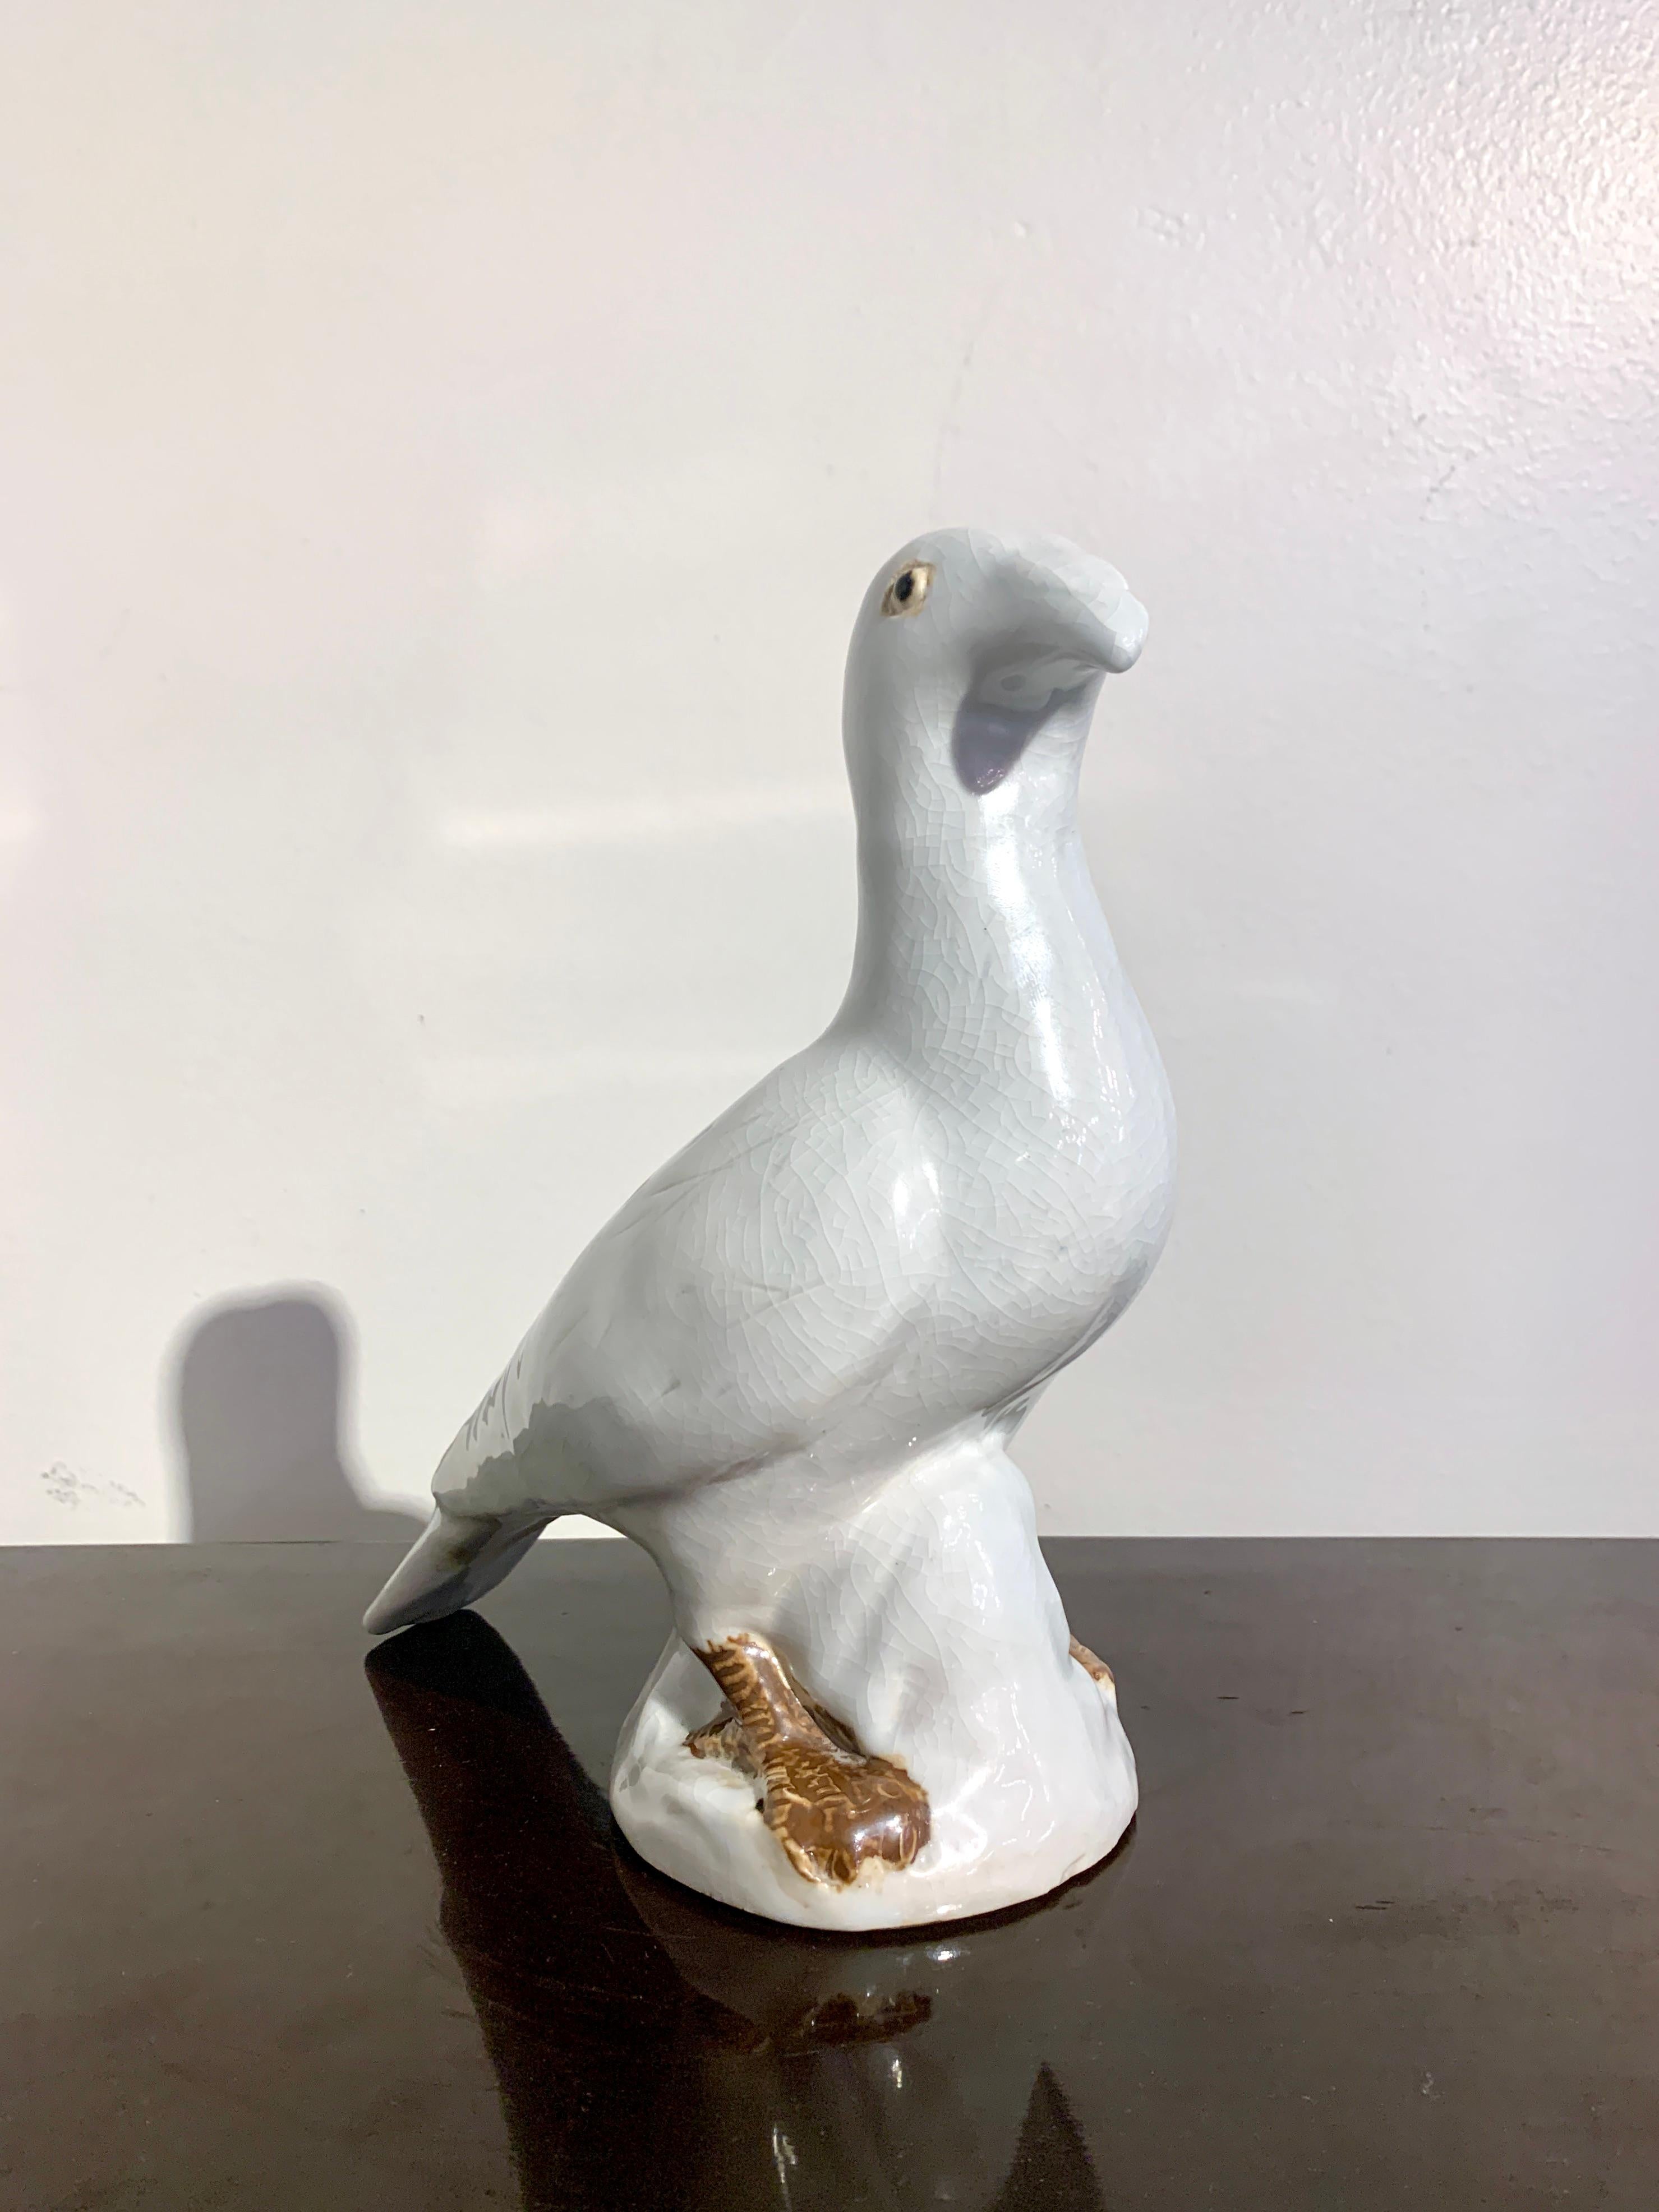 A charming Chinese export white glazed porcelain model of a dove or pigeon, Republic Period, early to mid 20th century, China.

The noble bird is portrayed perched upon a rocky outcrop, wings folded against the body, head held high and alert.